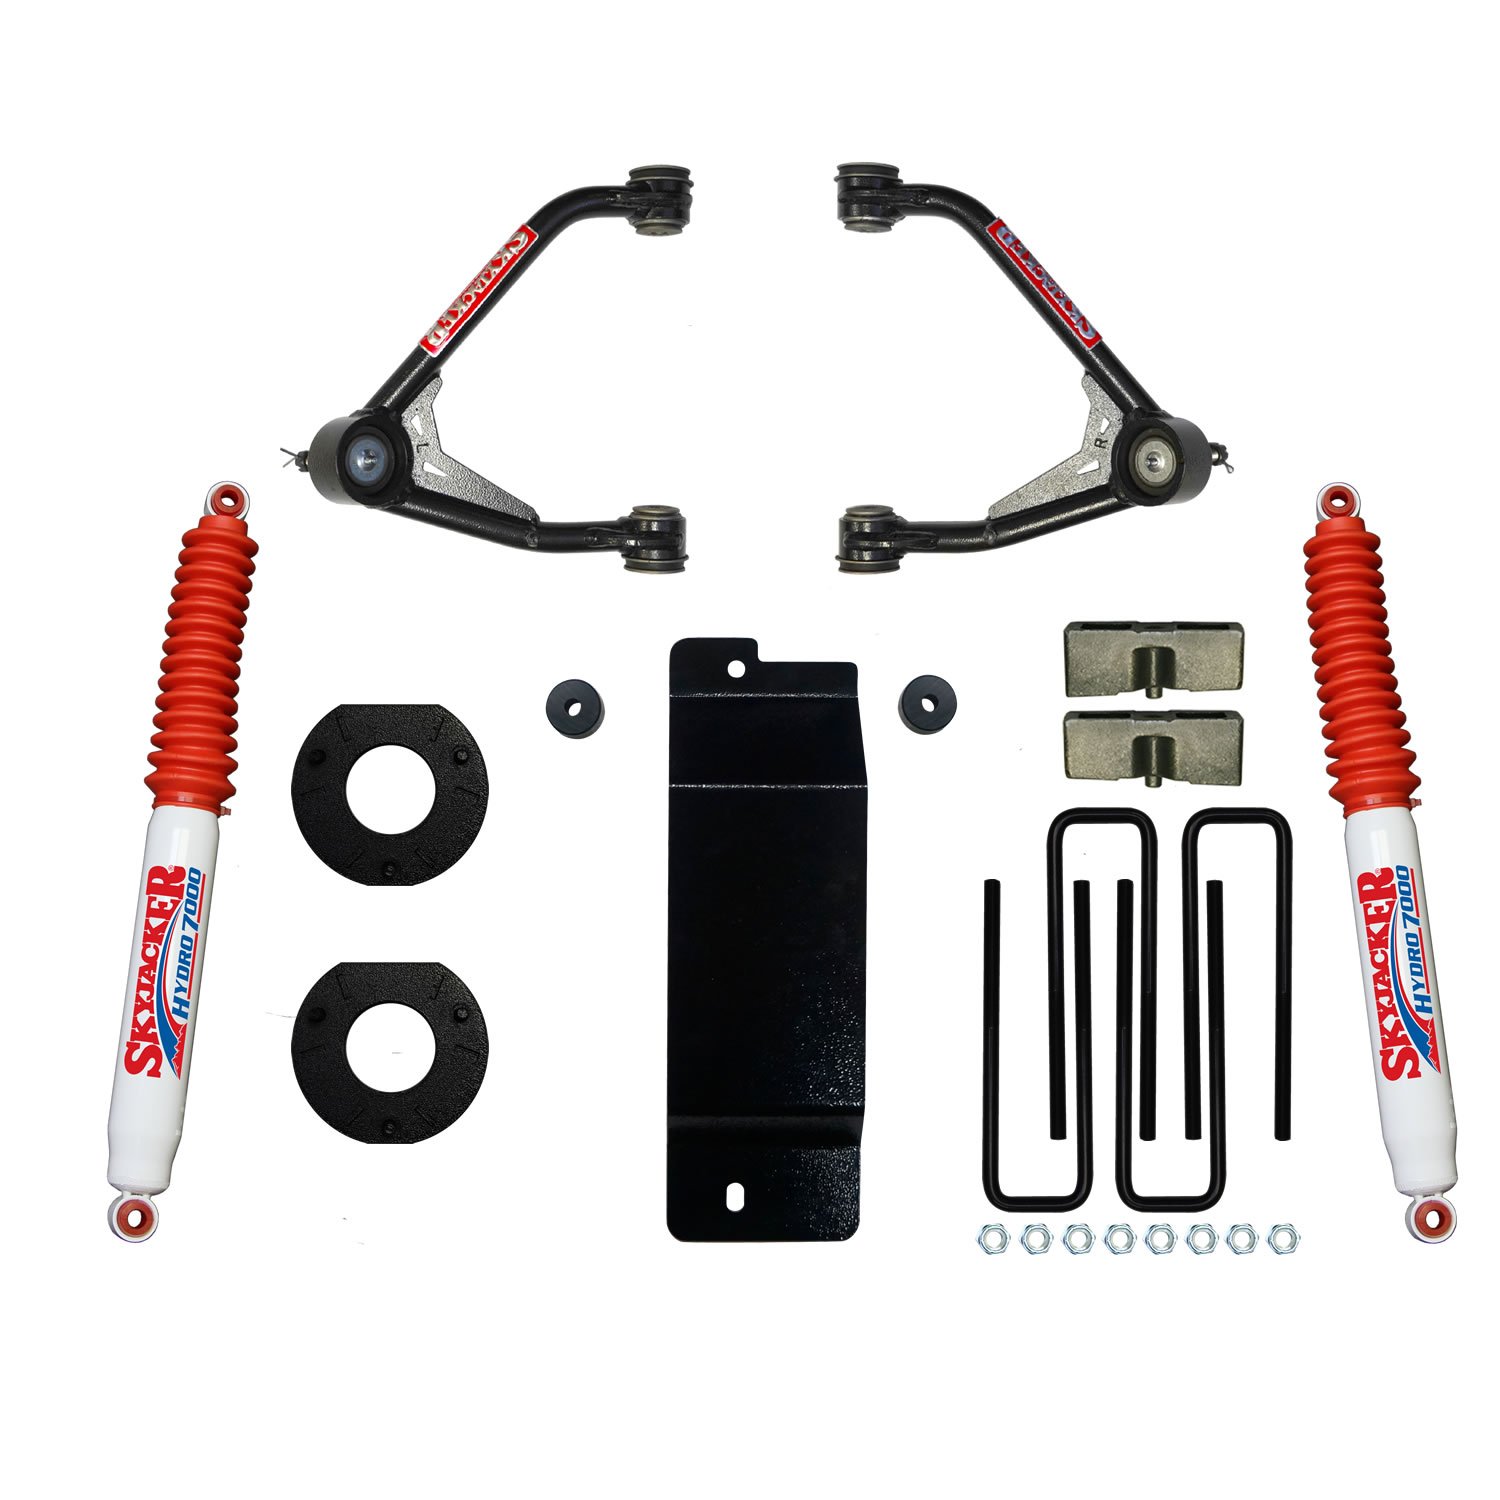 3.500-4.000 In. Upper Control Arm Lift Kit with